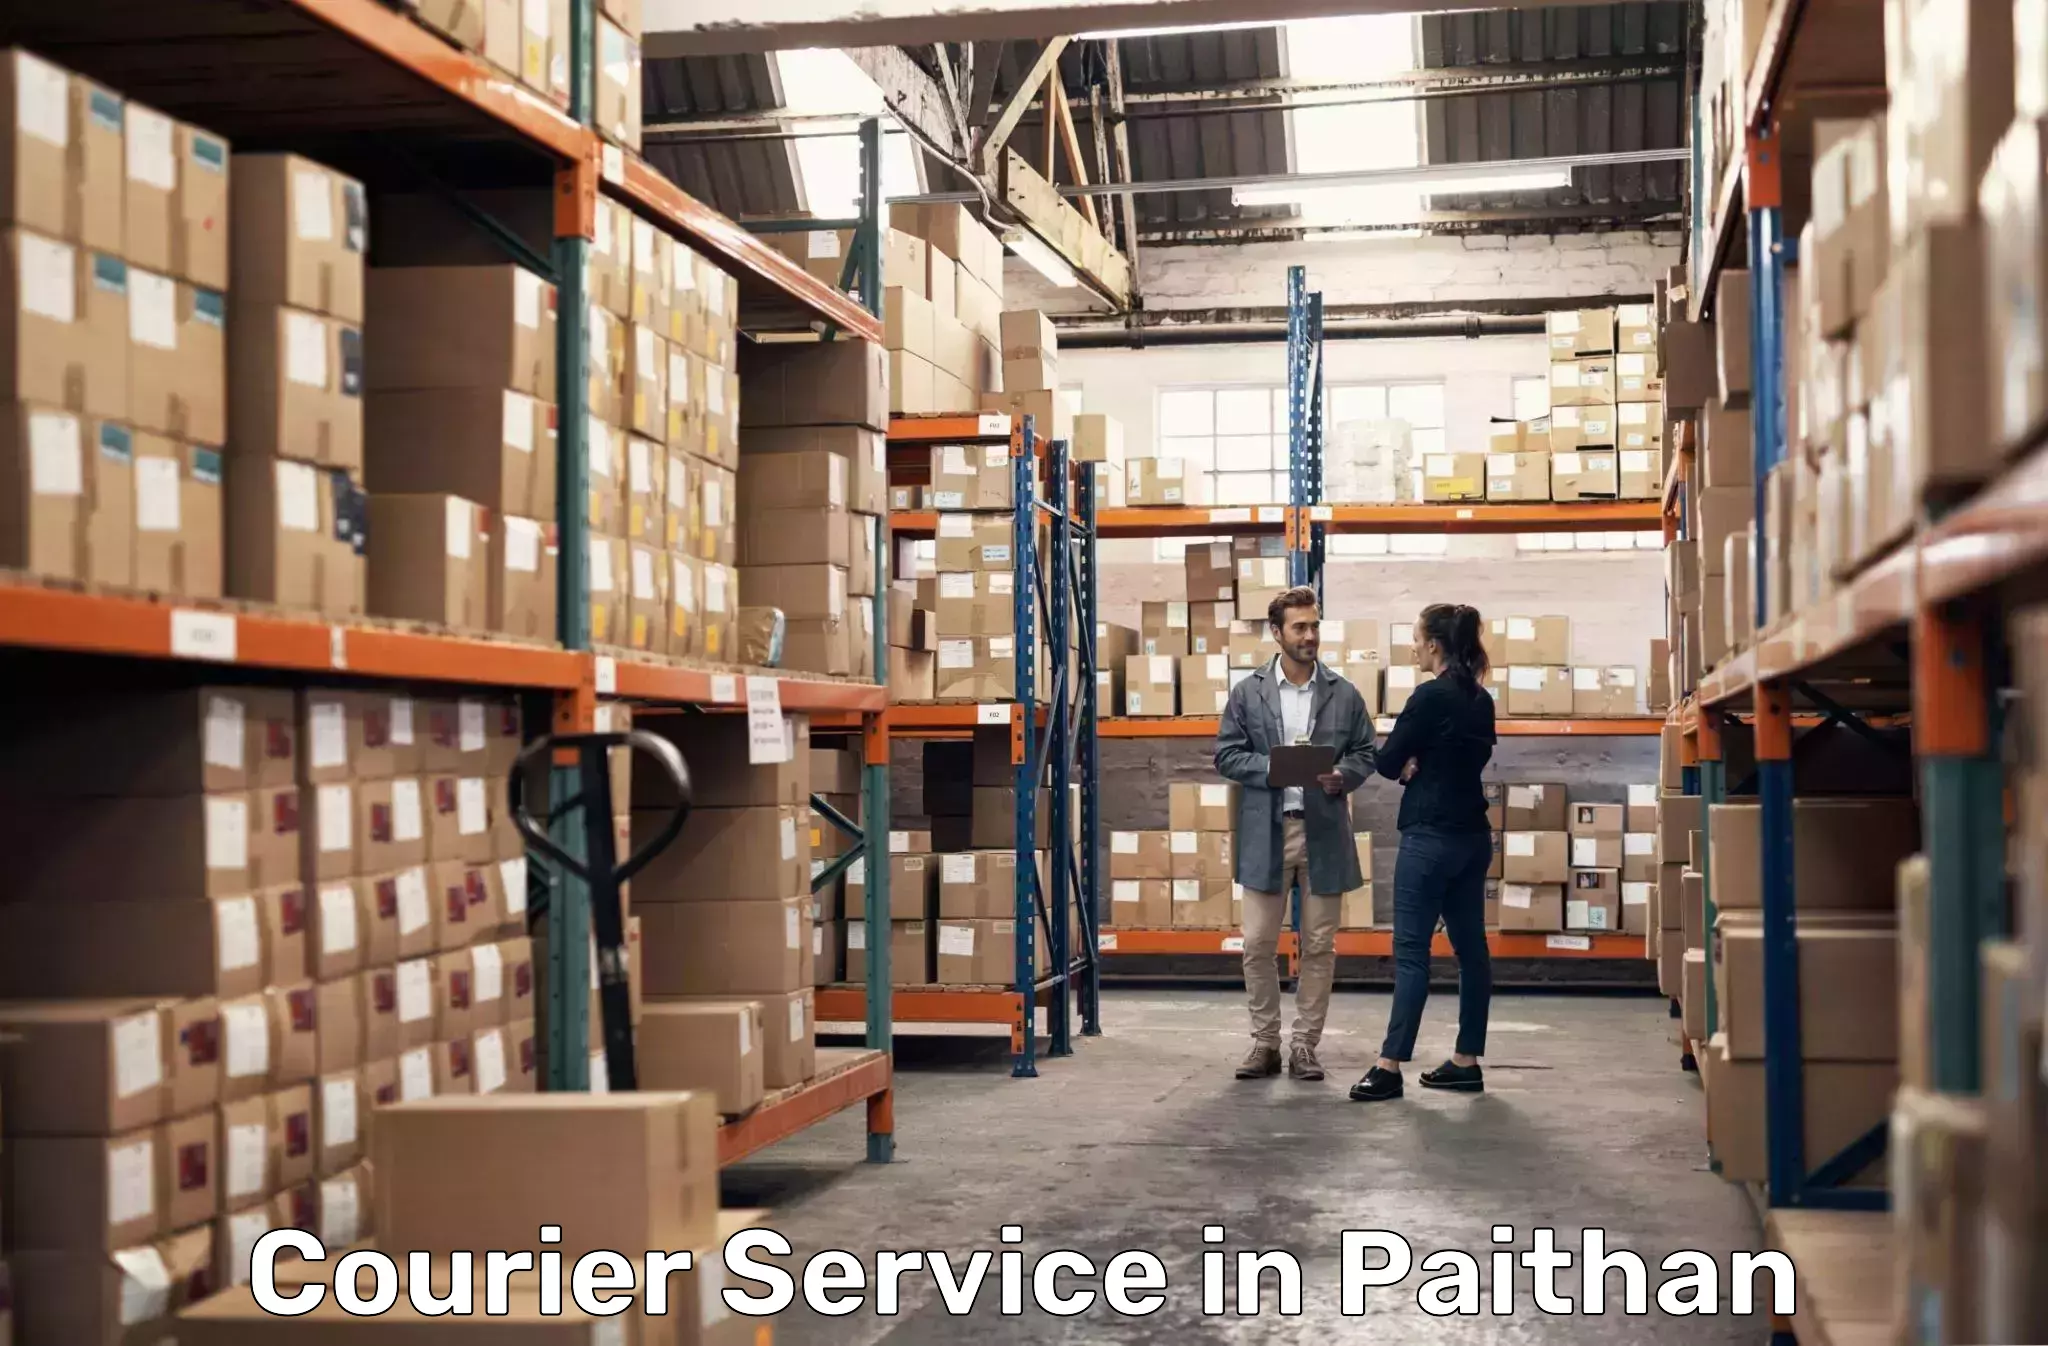 Customer-focused courier in Paithan